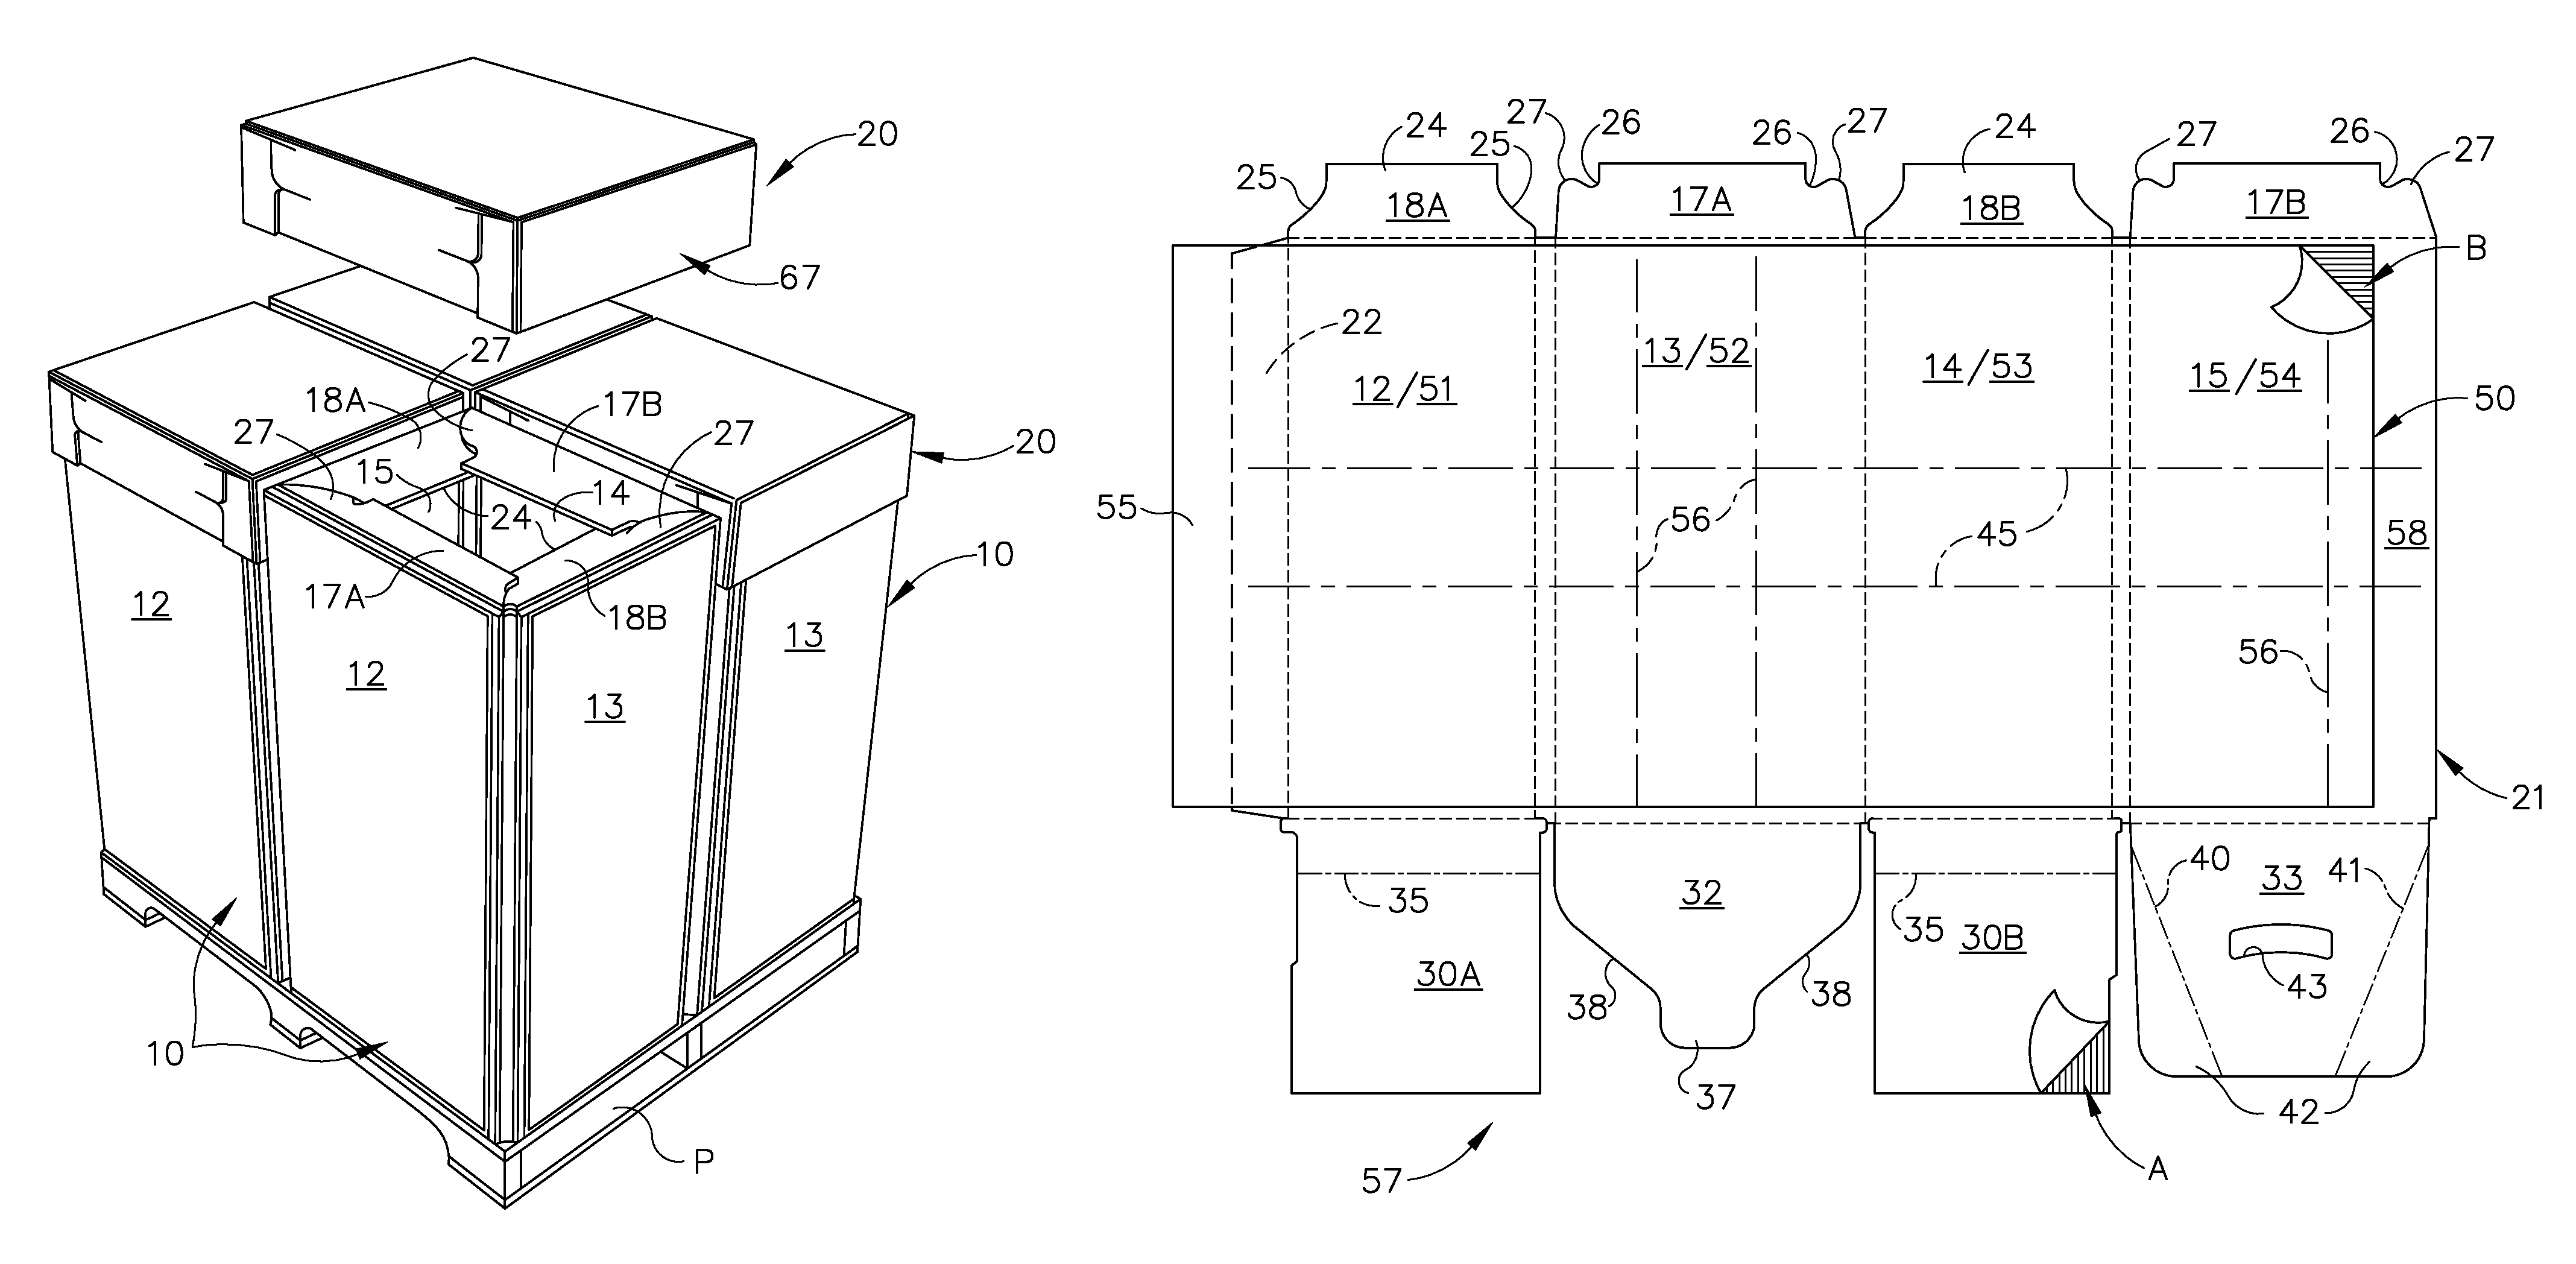 Reinforced cross-laminated bulk container